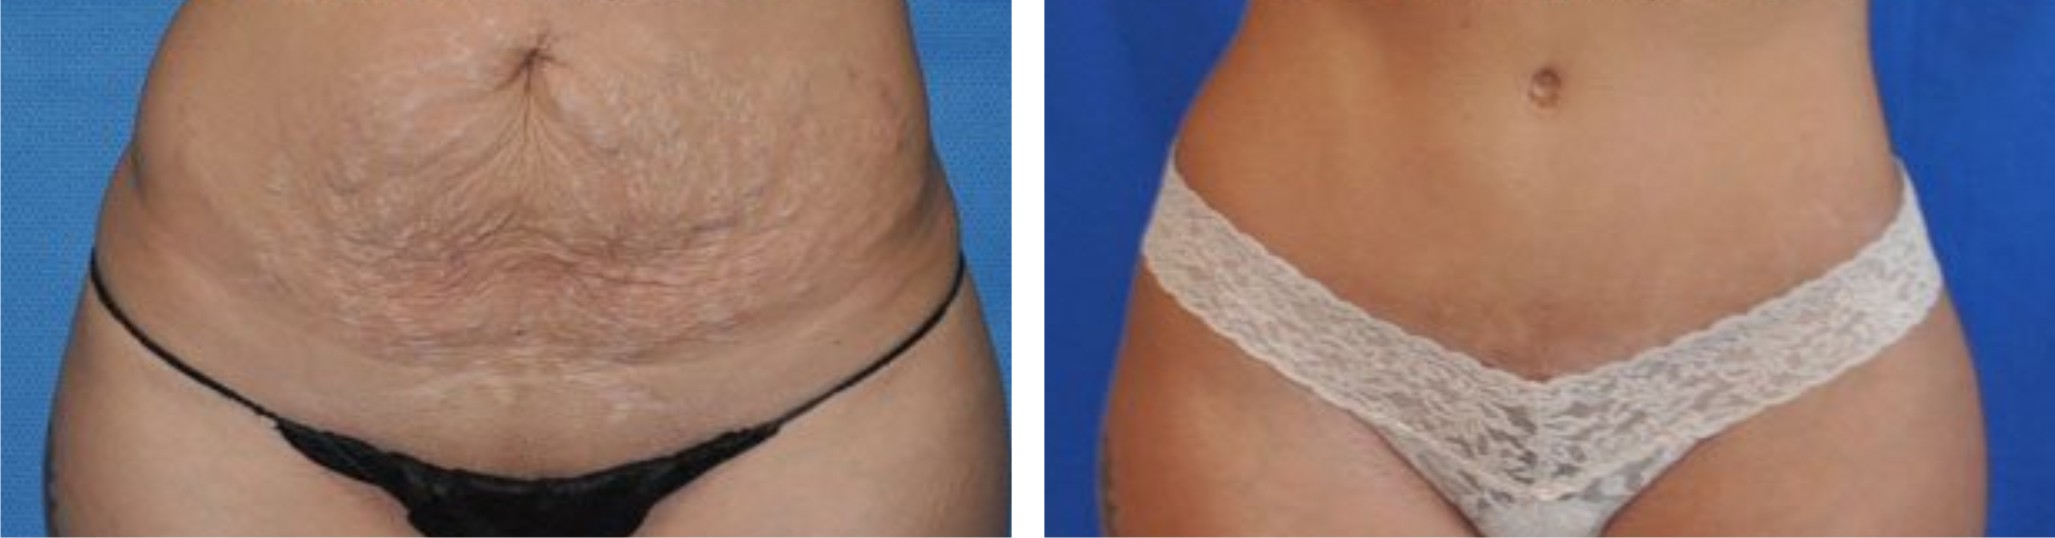 Before & after - Tummy tuck 2